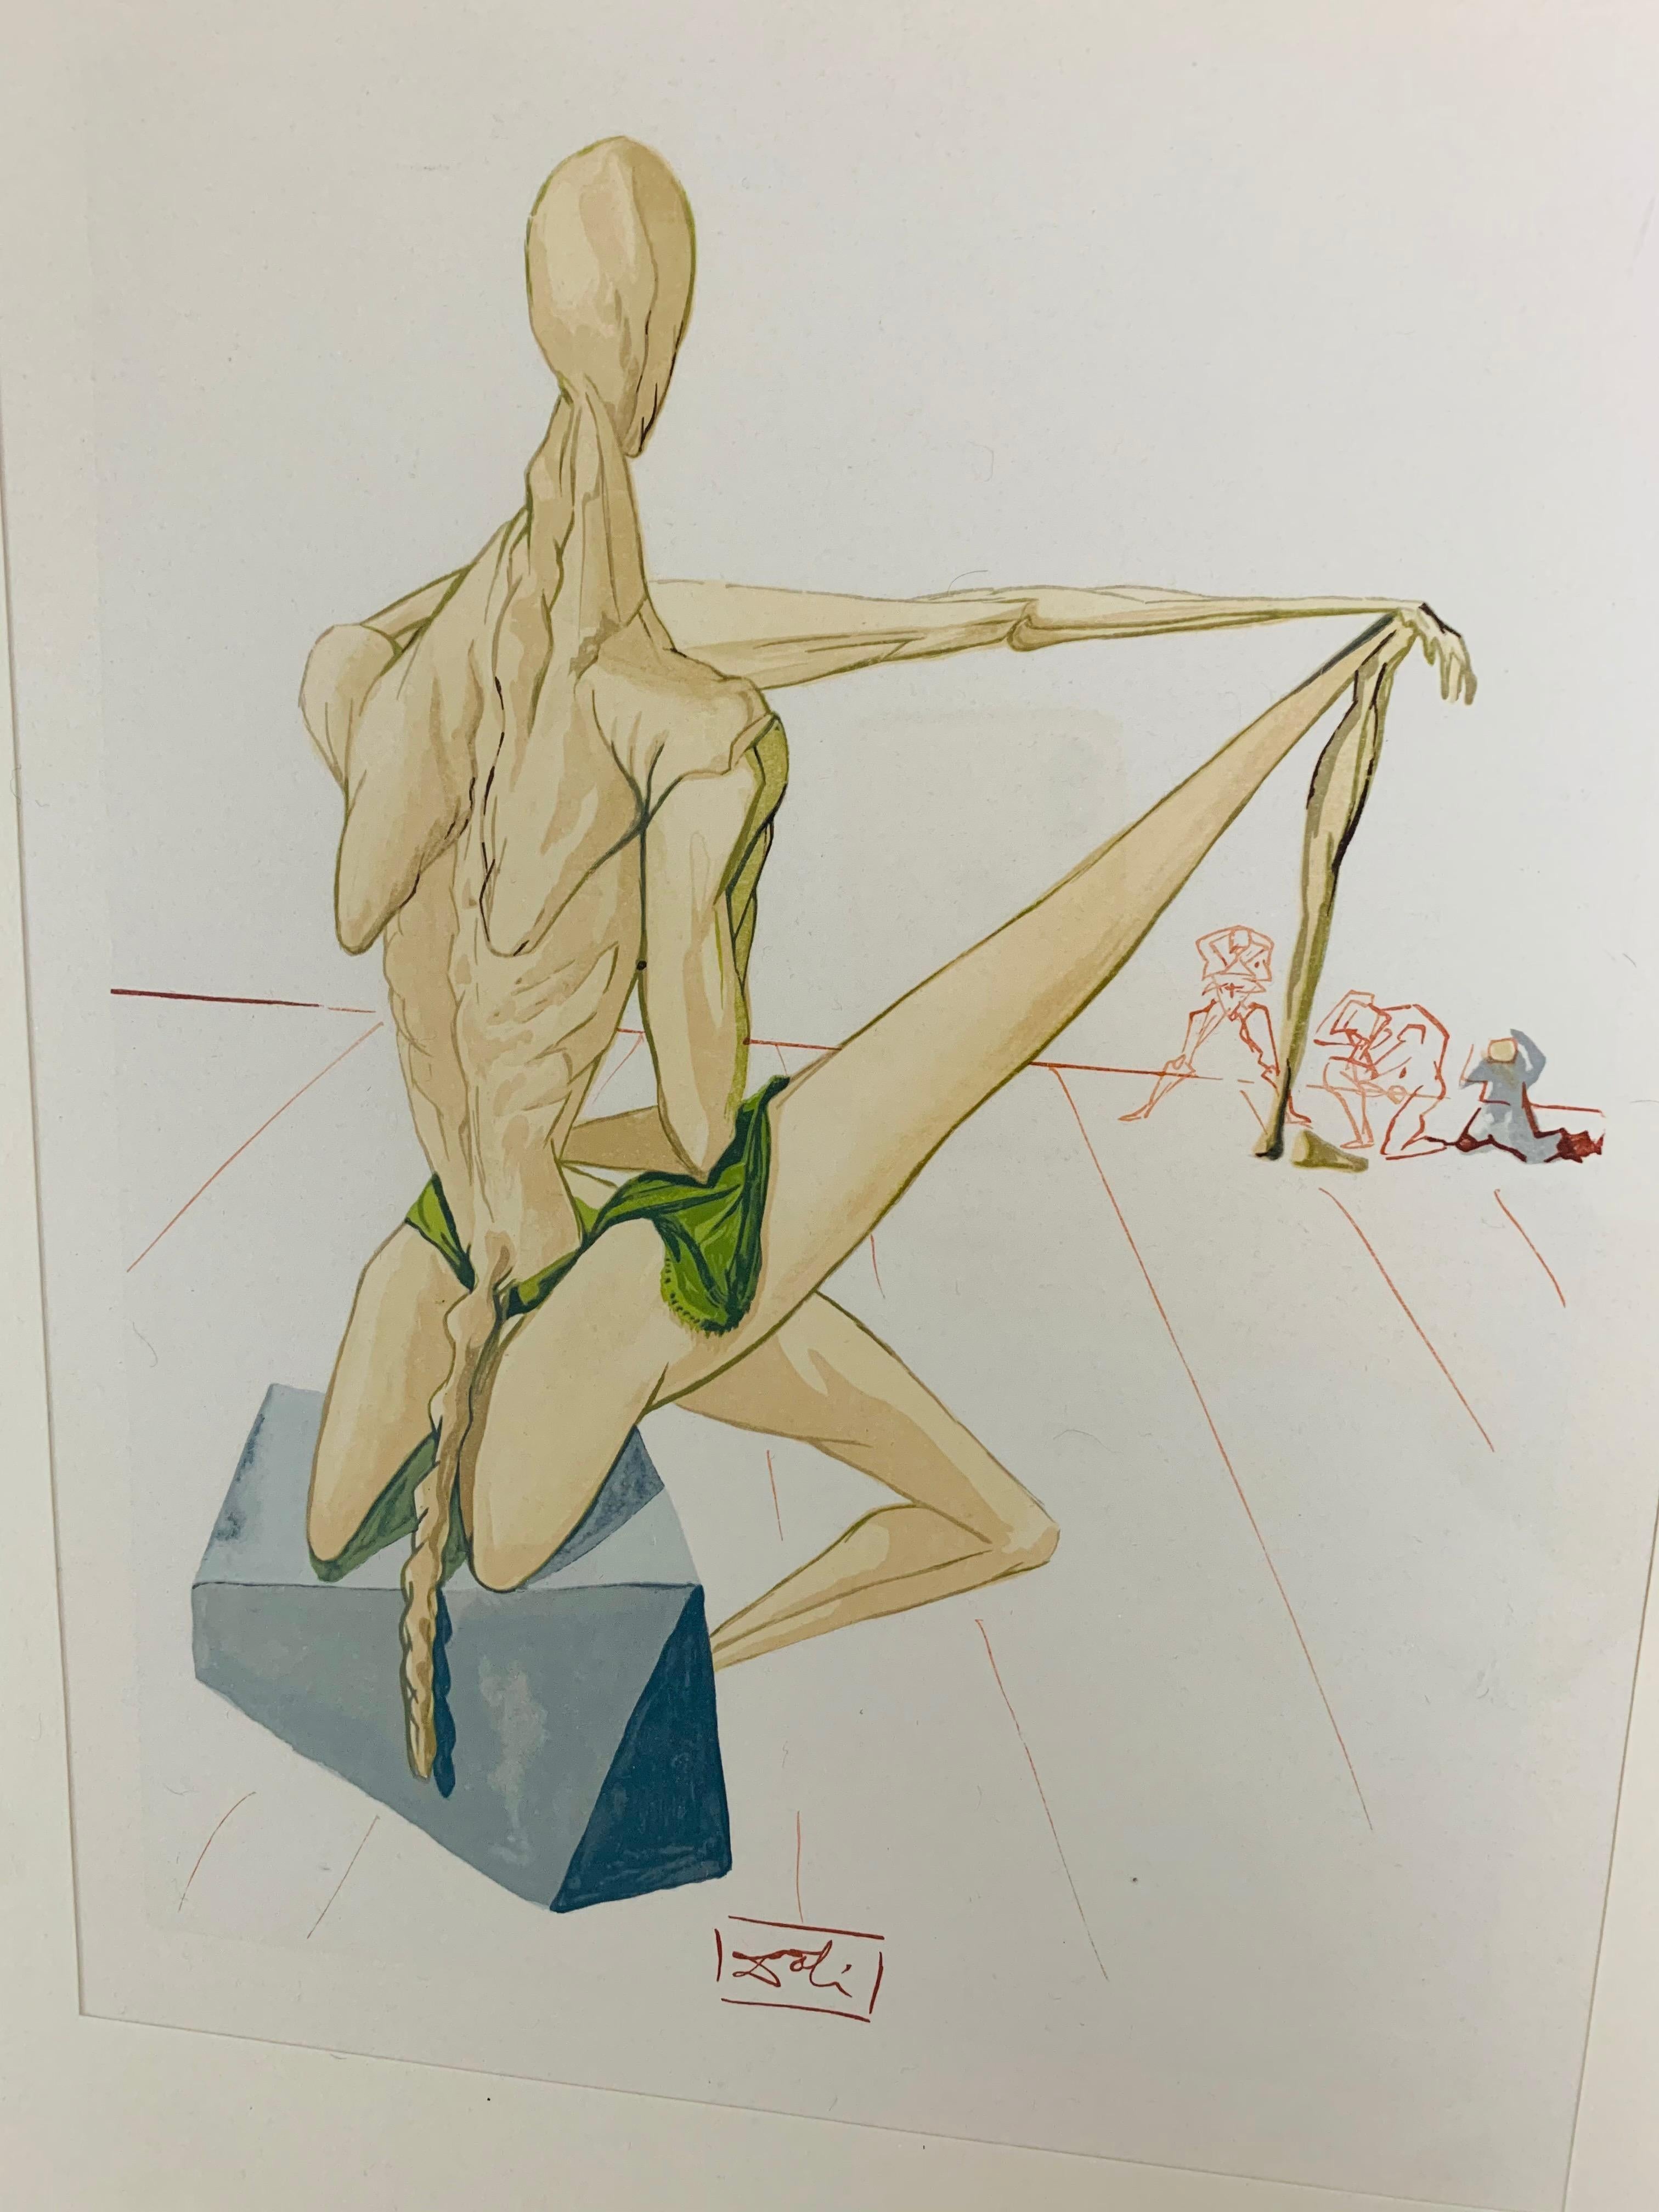 A fine and precious surrealist woodblock prints by Salvador Dali (1904 - 1989) of the acclaimed Dante's Divine Comedy and published by Foret/Les Heures Claires in 1960. The male illustration is inferno canto 5 titled 